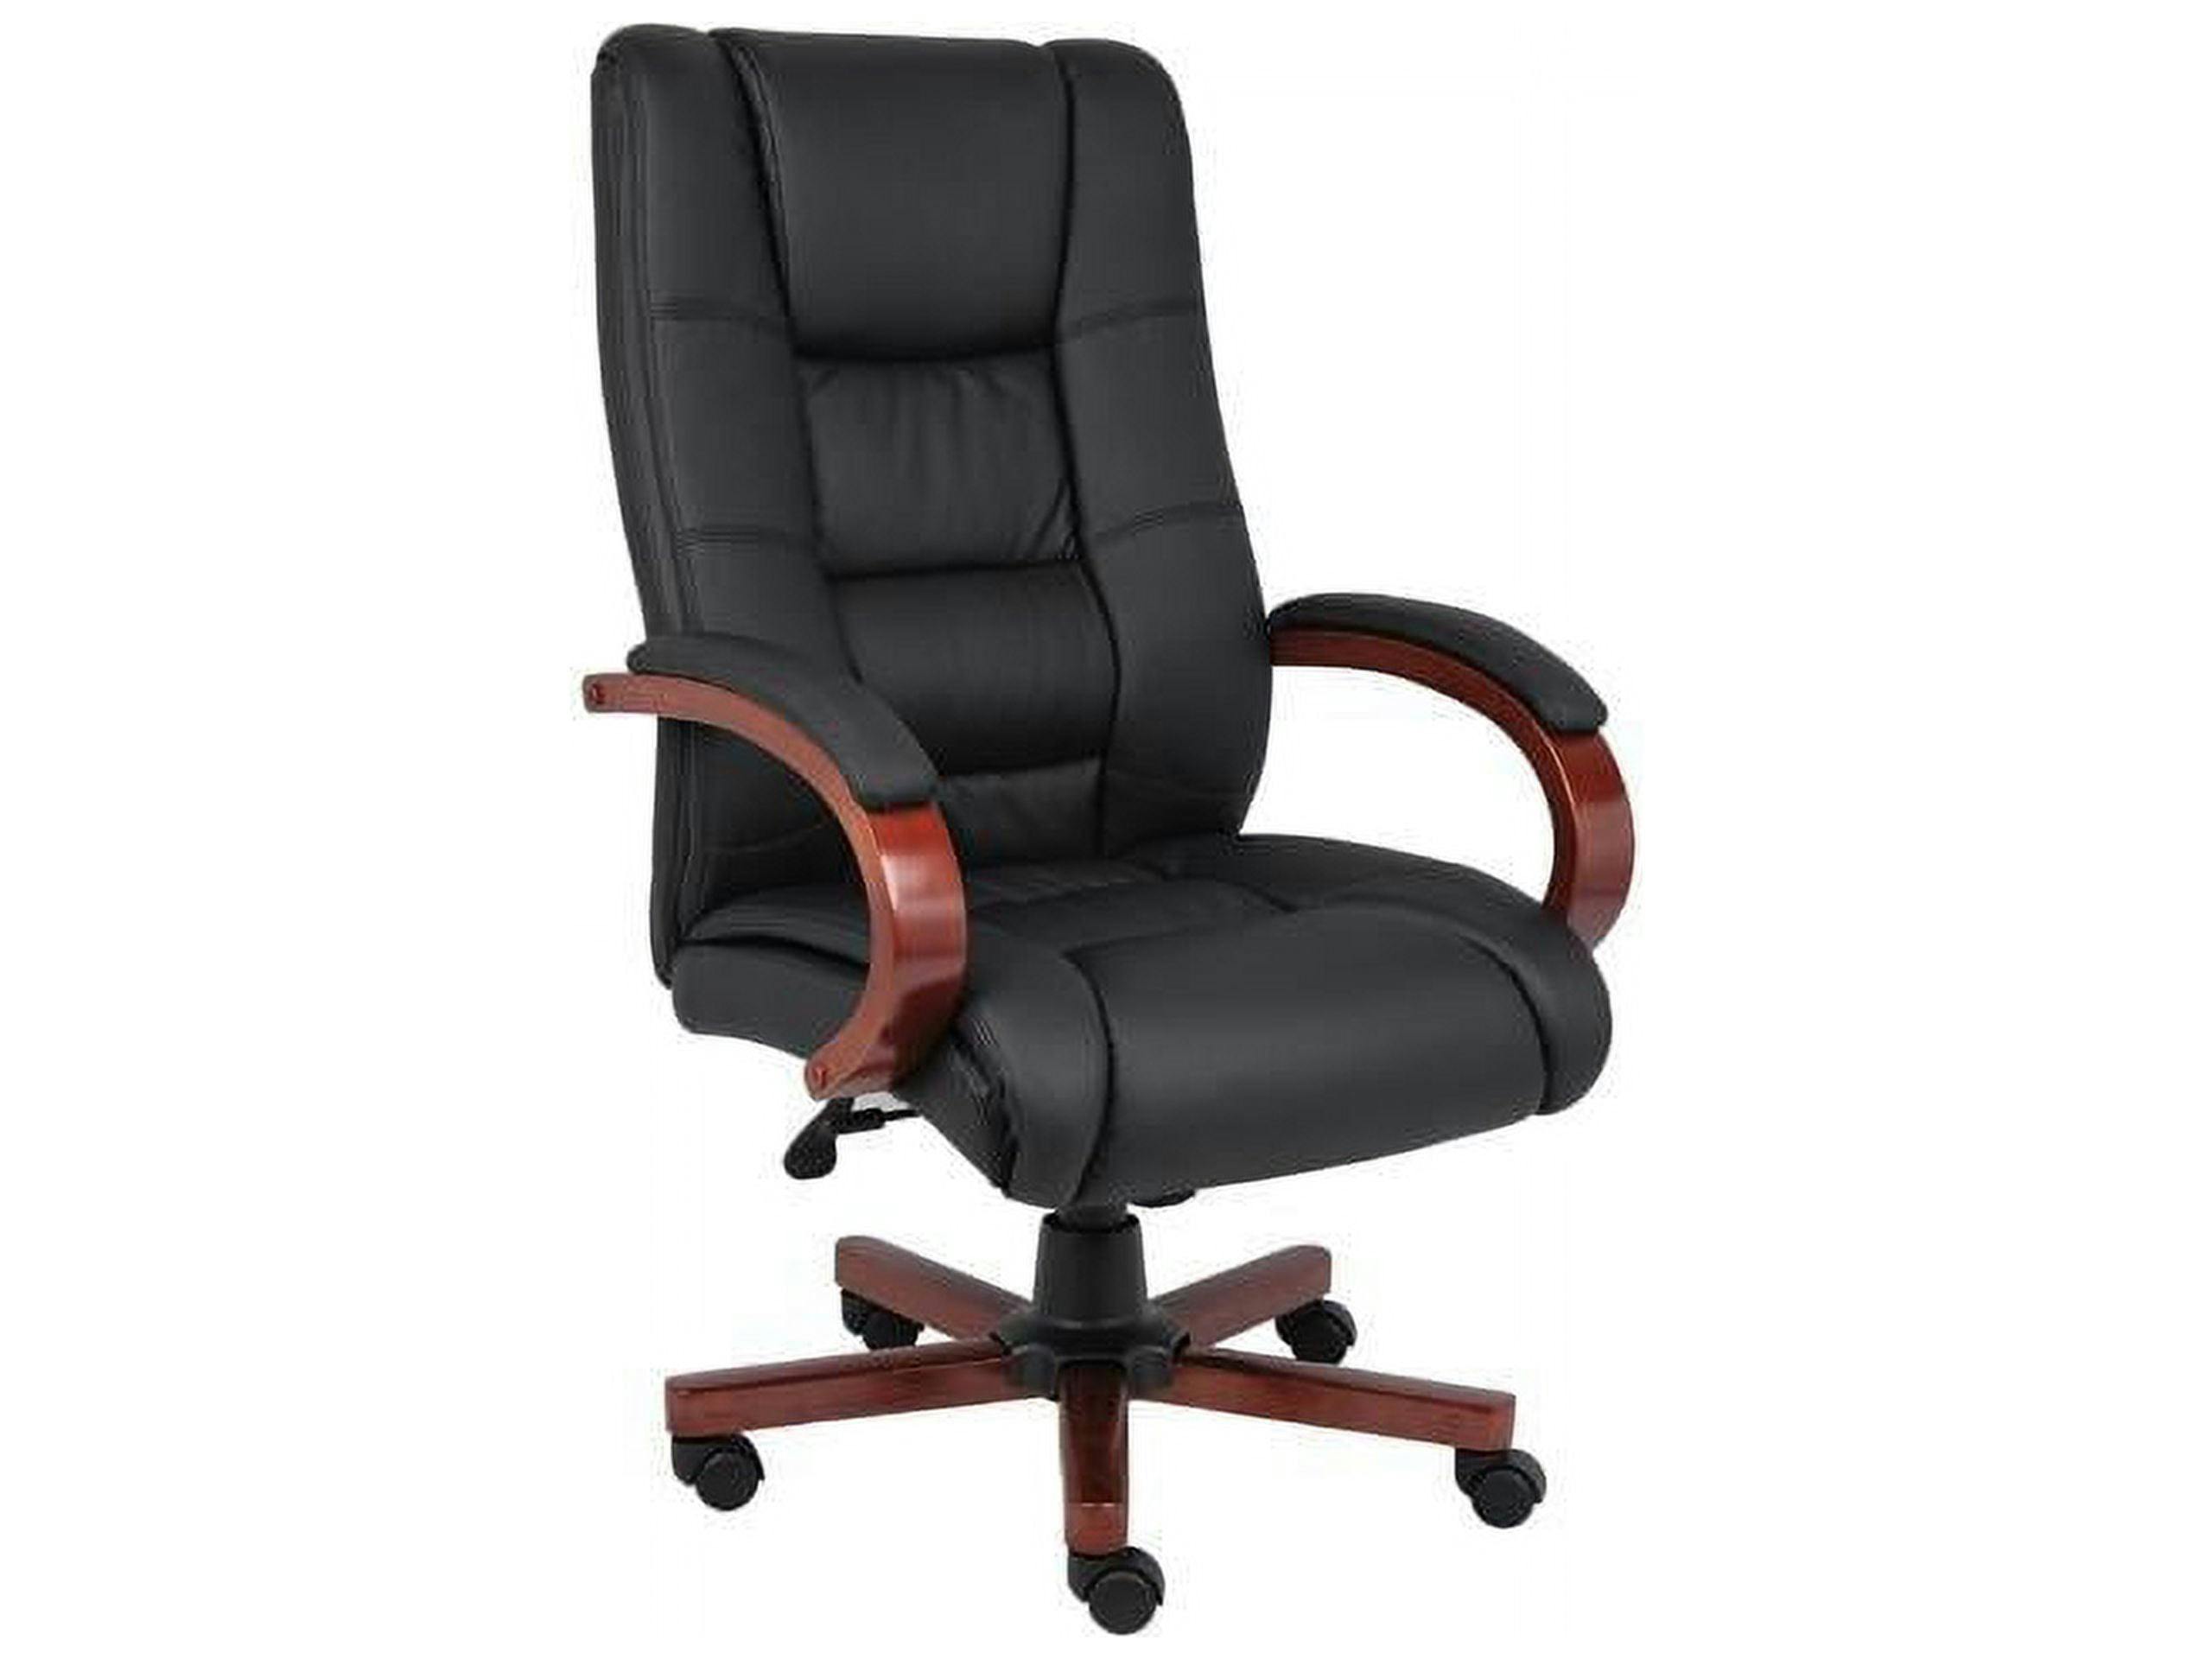 Elegant High-Back Executive Swivel Chair with Wood Accents, Black